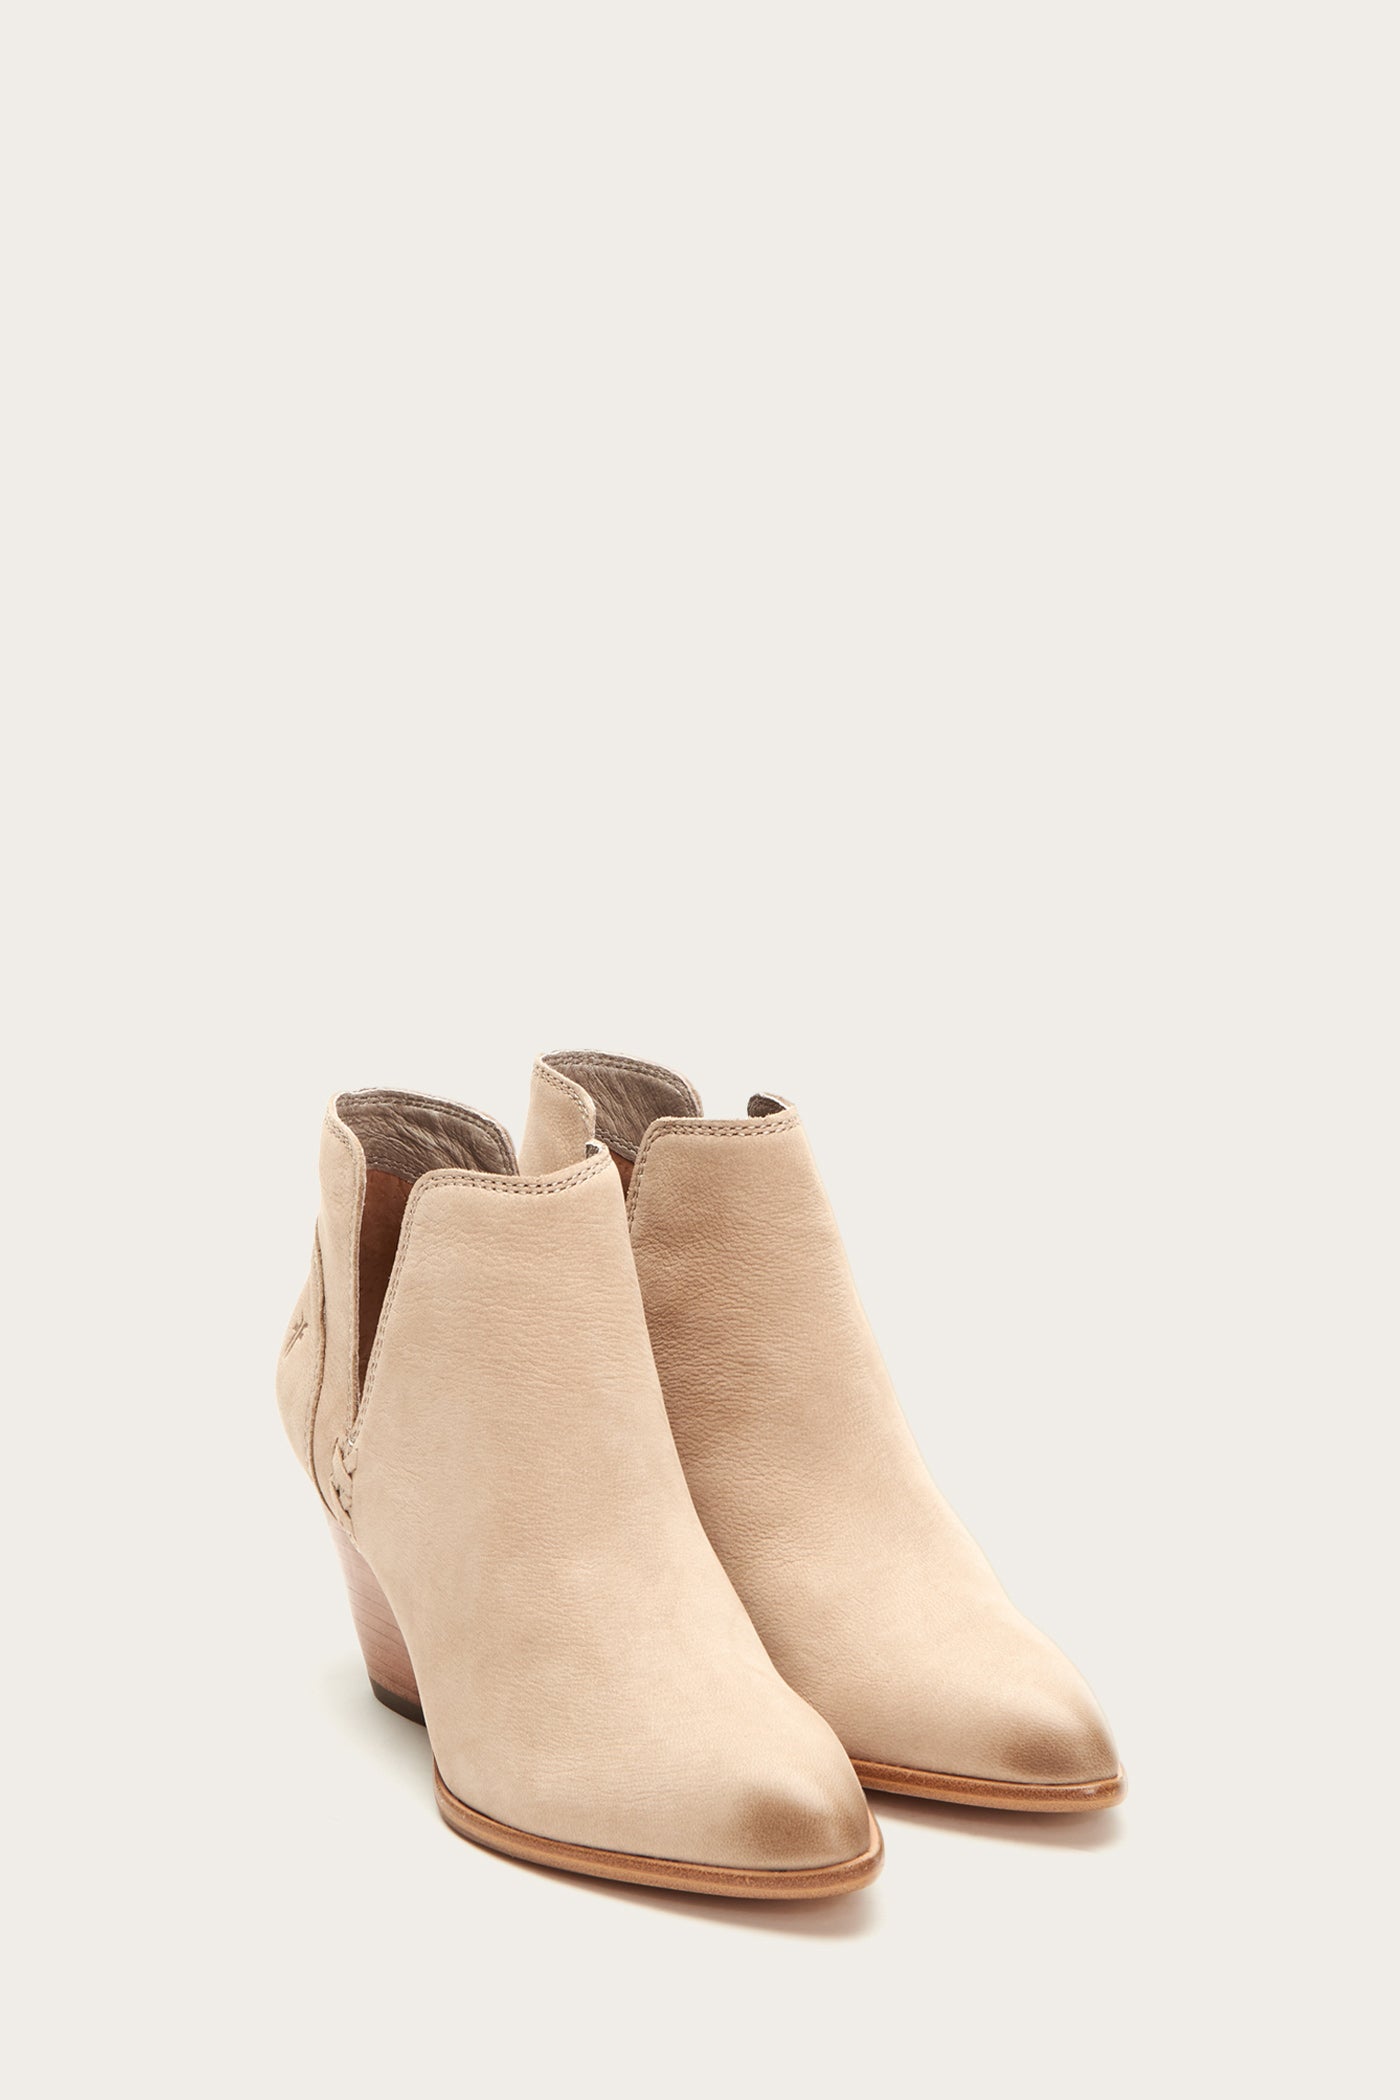 Reina Cut Out Bootie | FRYE Since 1863